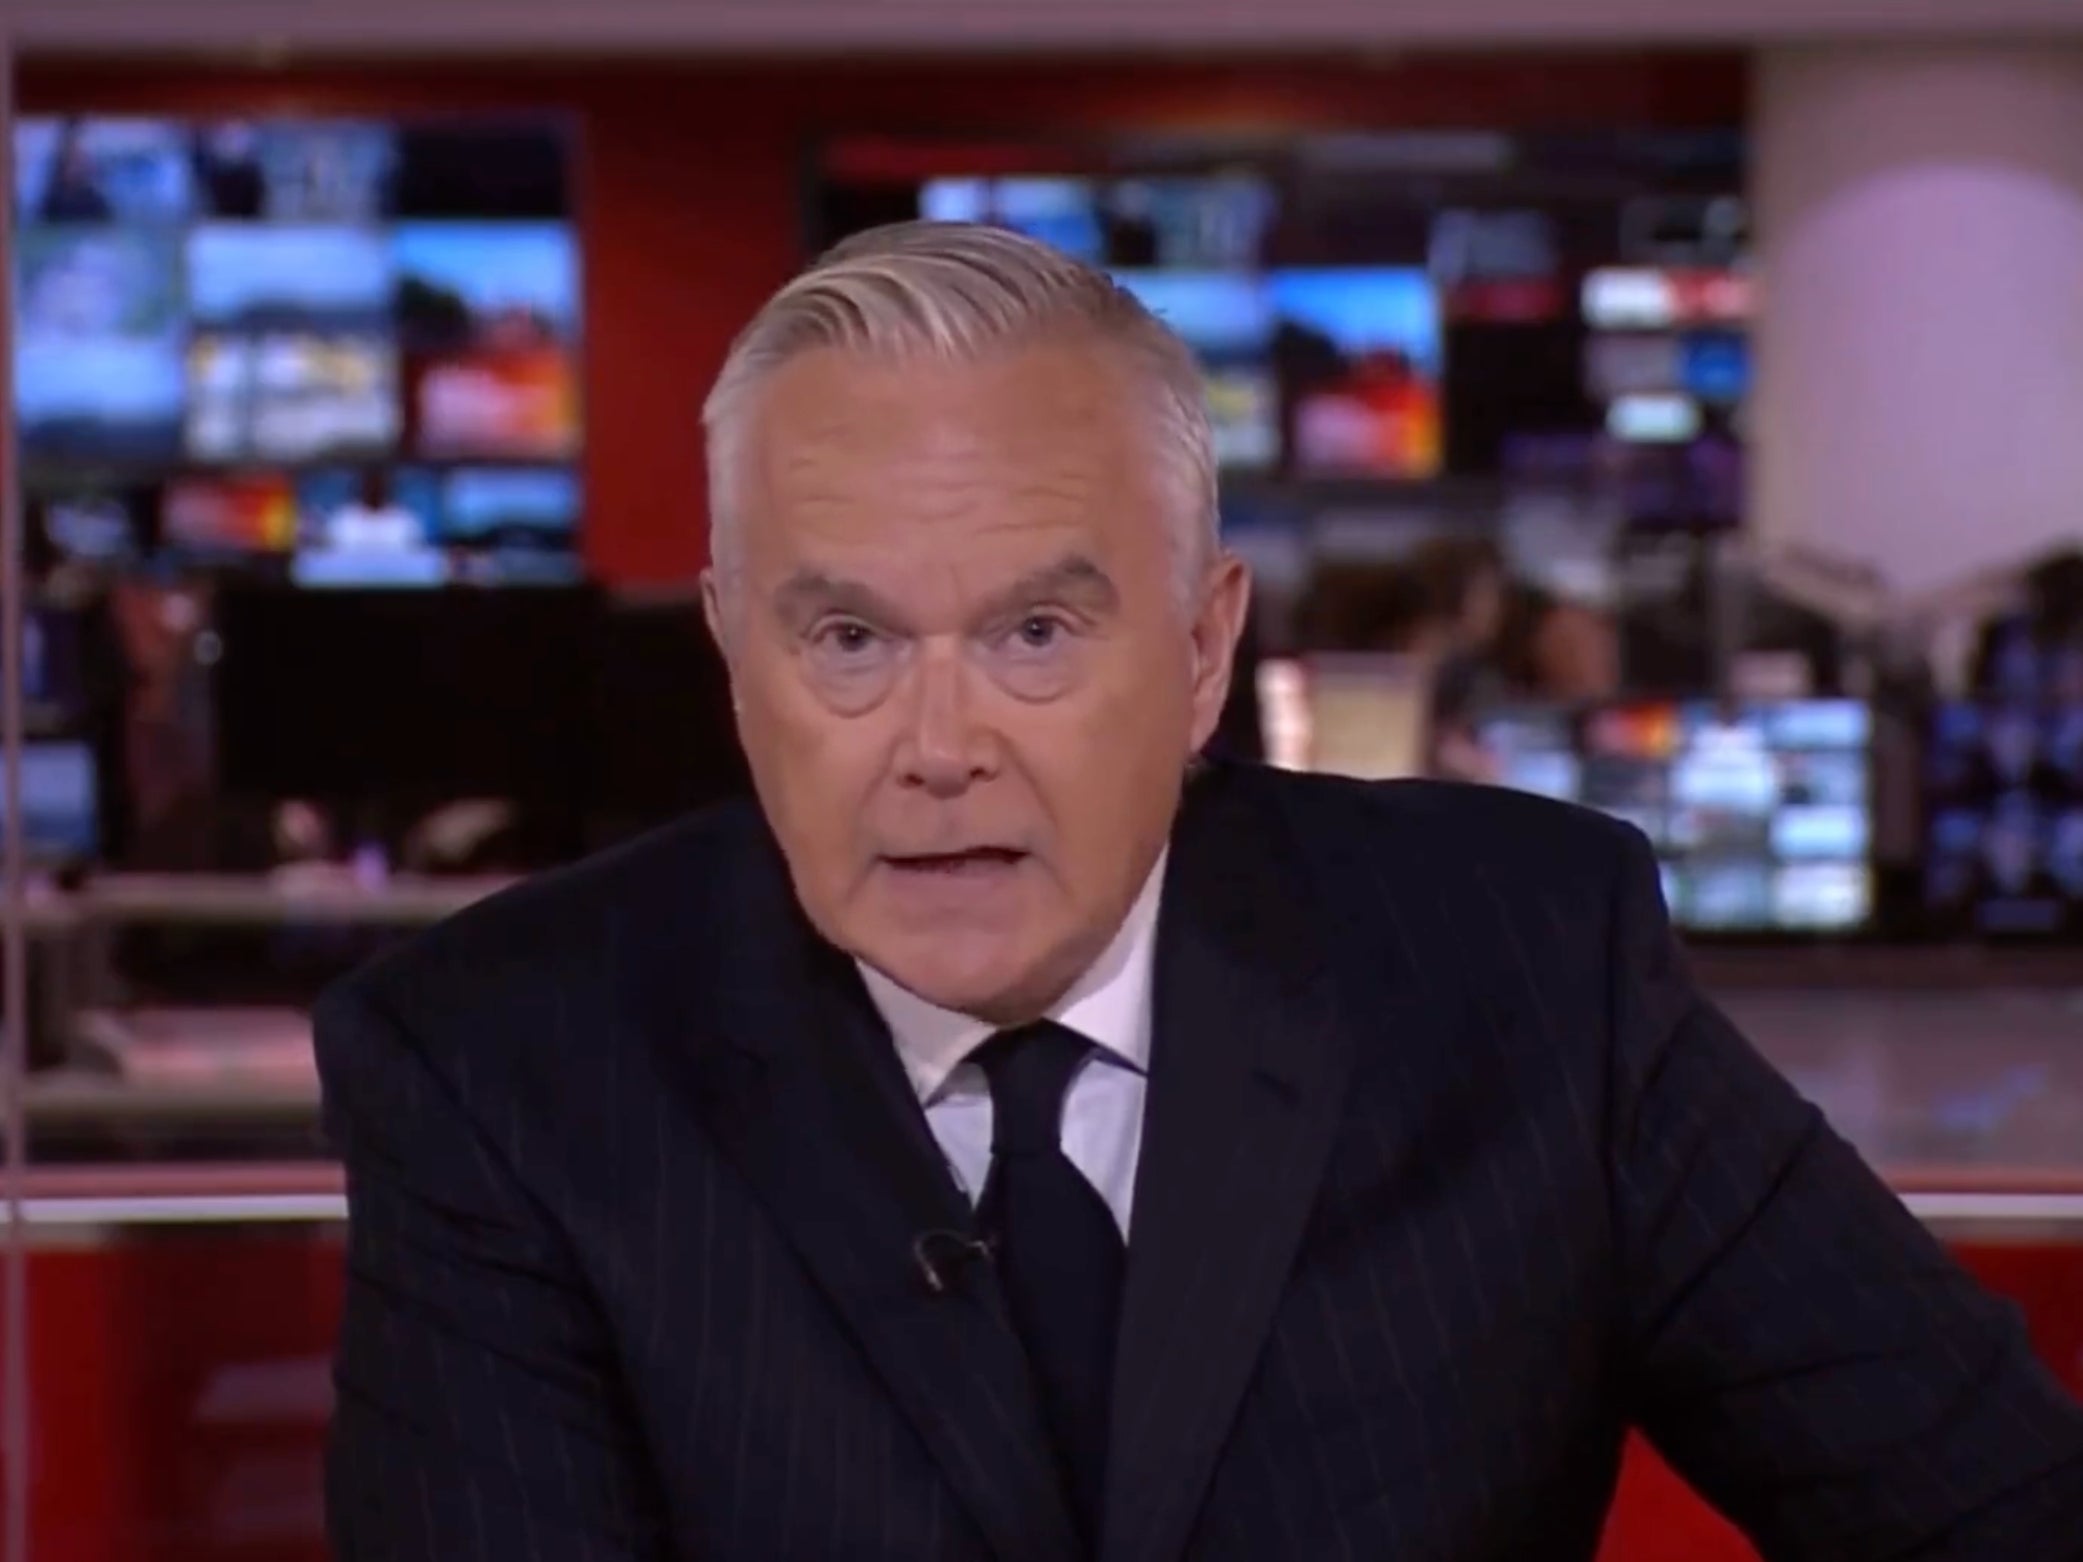 Huw Edwards announcing the death of the Queen in 2022